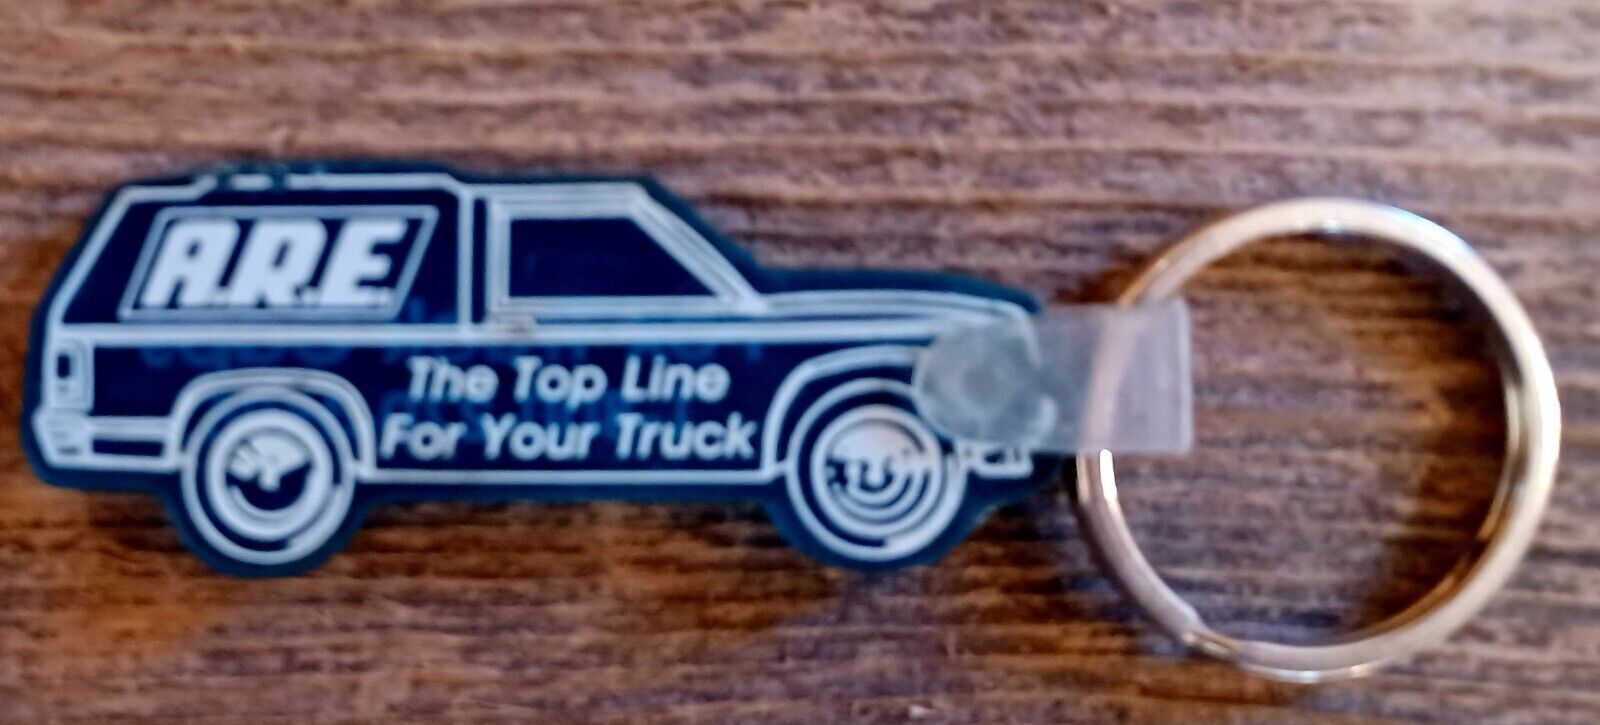 Vintage - A.R.E. The Top Line For Your Truck Keychain -  Fox Truck Caps 2 Sided